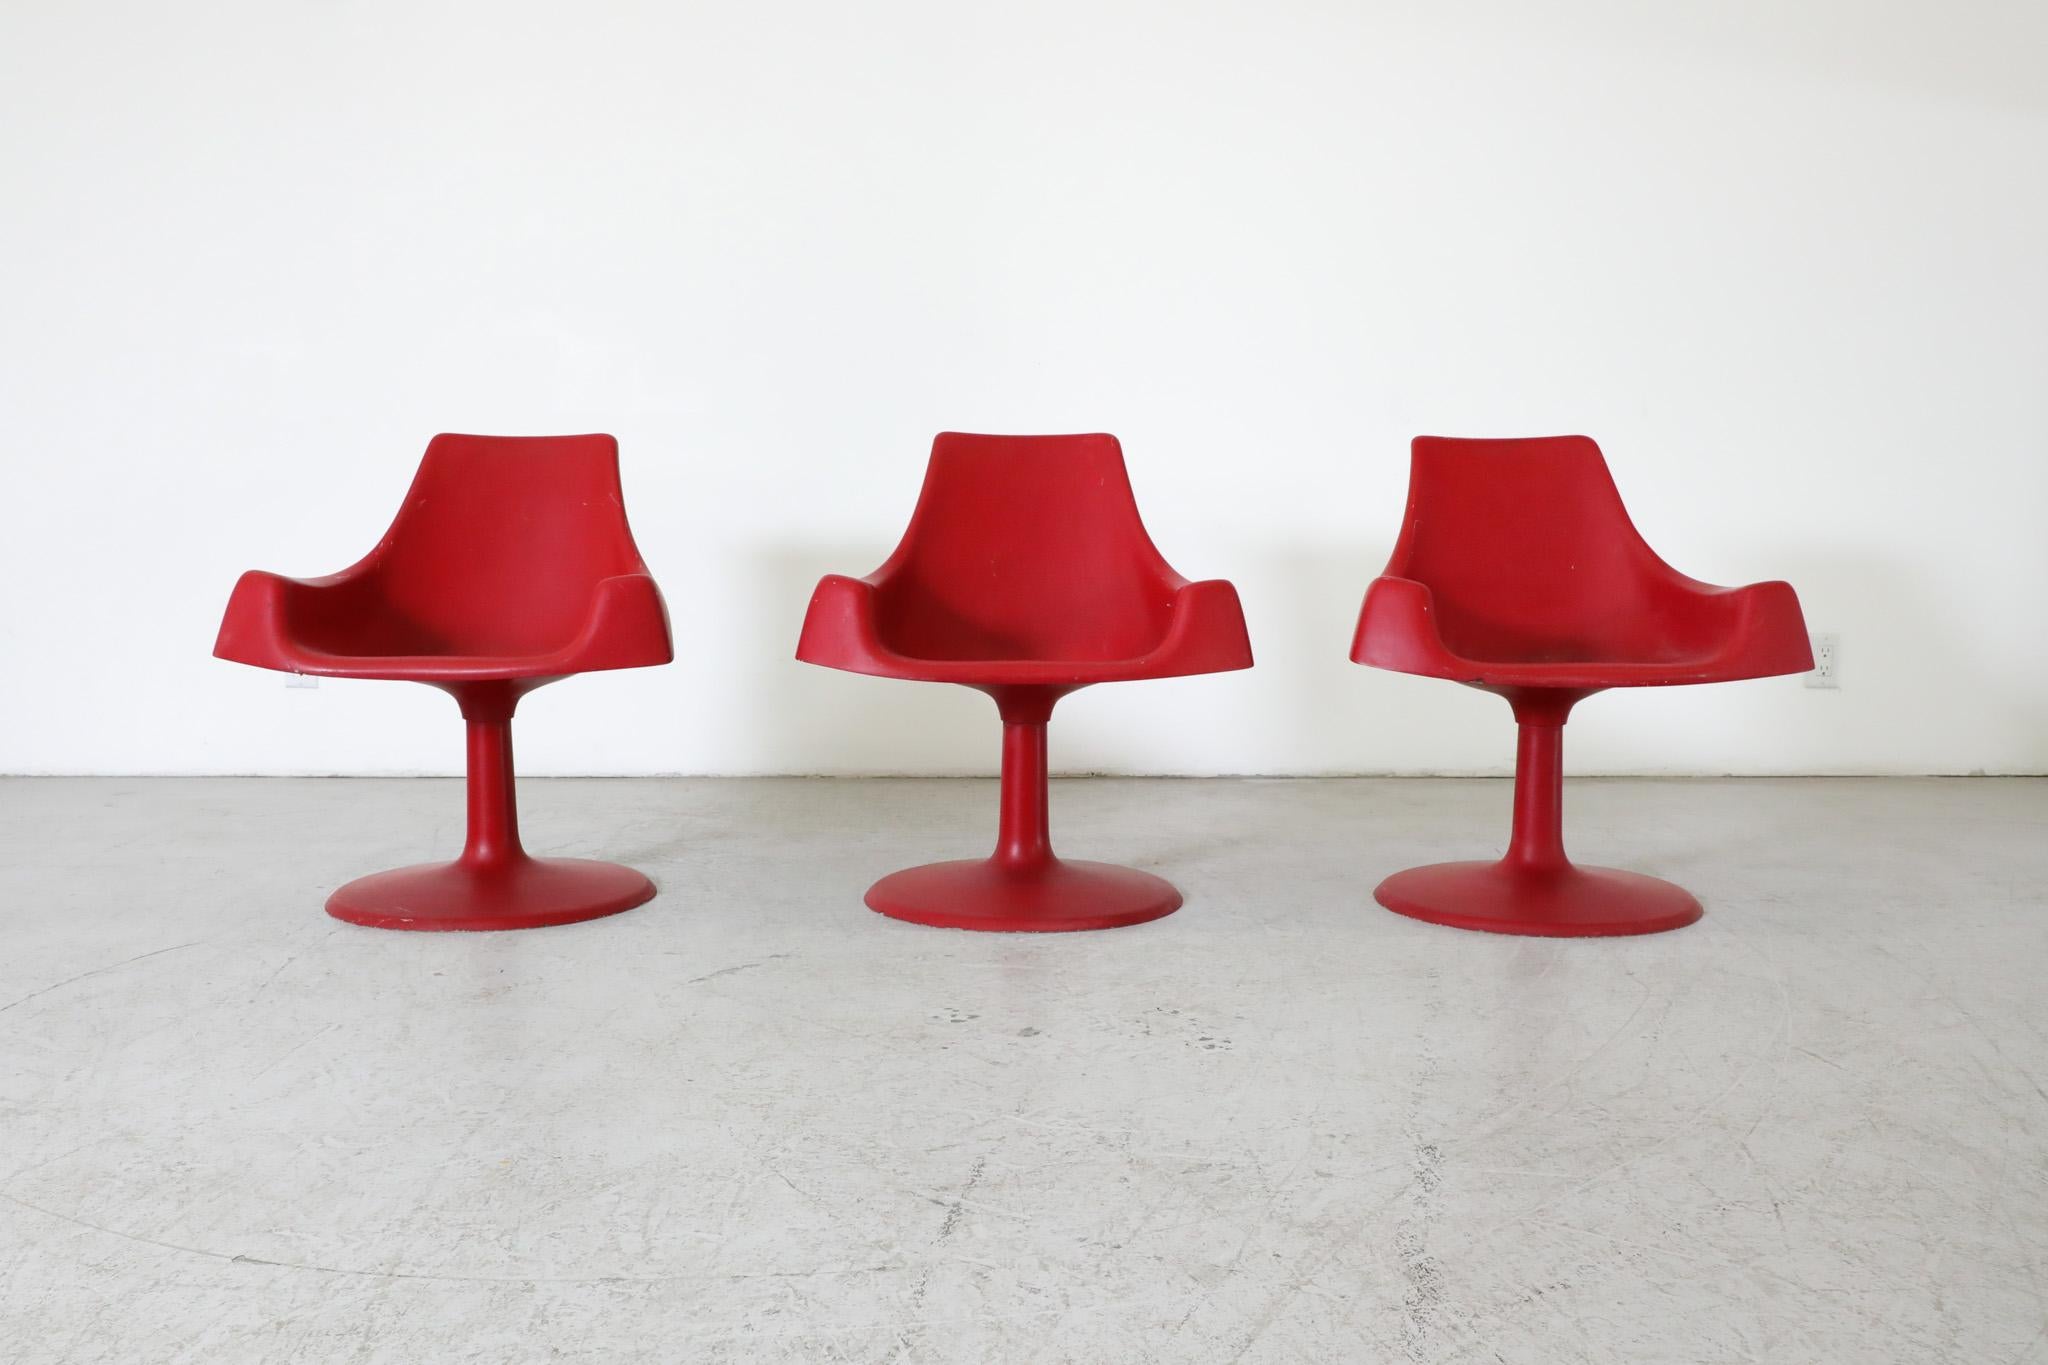 Space age mod Eero Saarinen inspired red plastic molded armchairs with fixed pedestal base. In original condition with visible wear consistent with its age and use. three available.